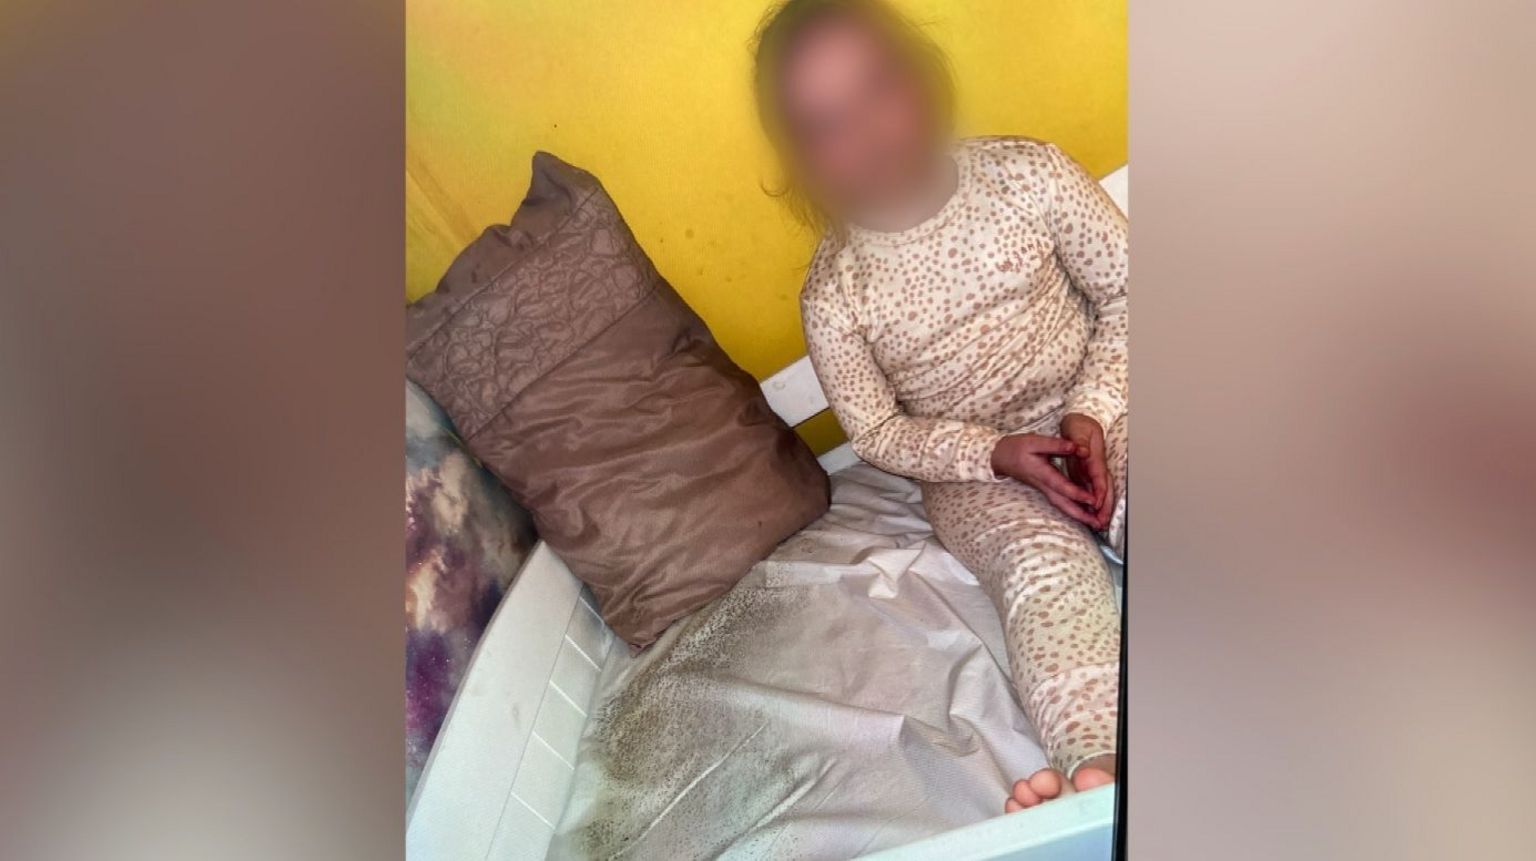 Child pictured in room containing mould